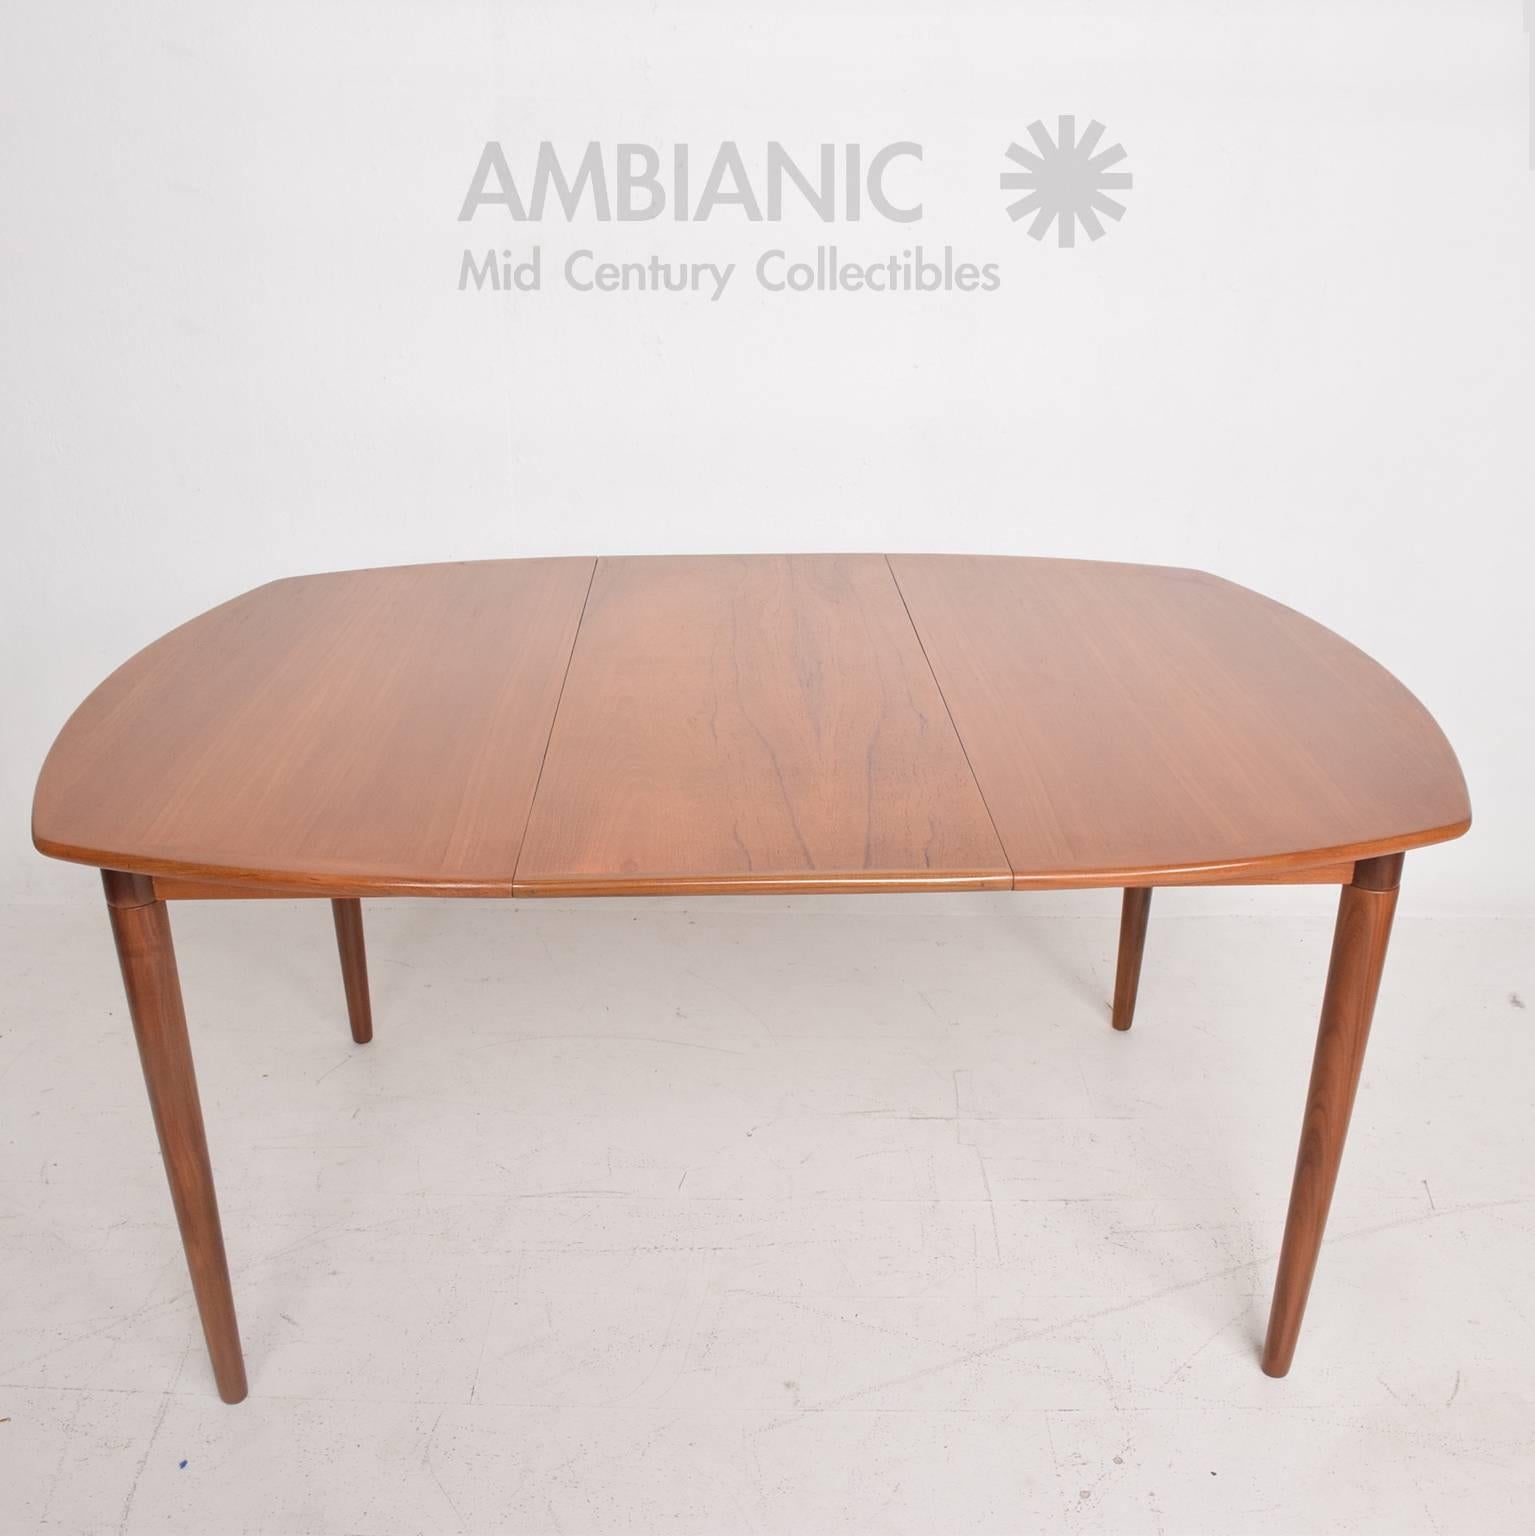 Lacquered Mid-Century Danish Modern Teak Dining Table with Two Extensions